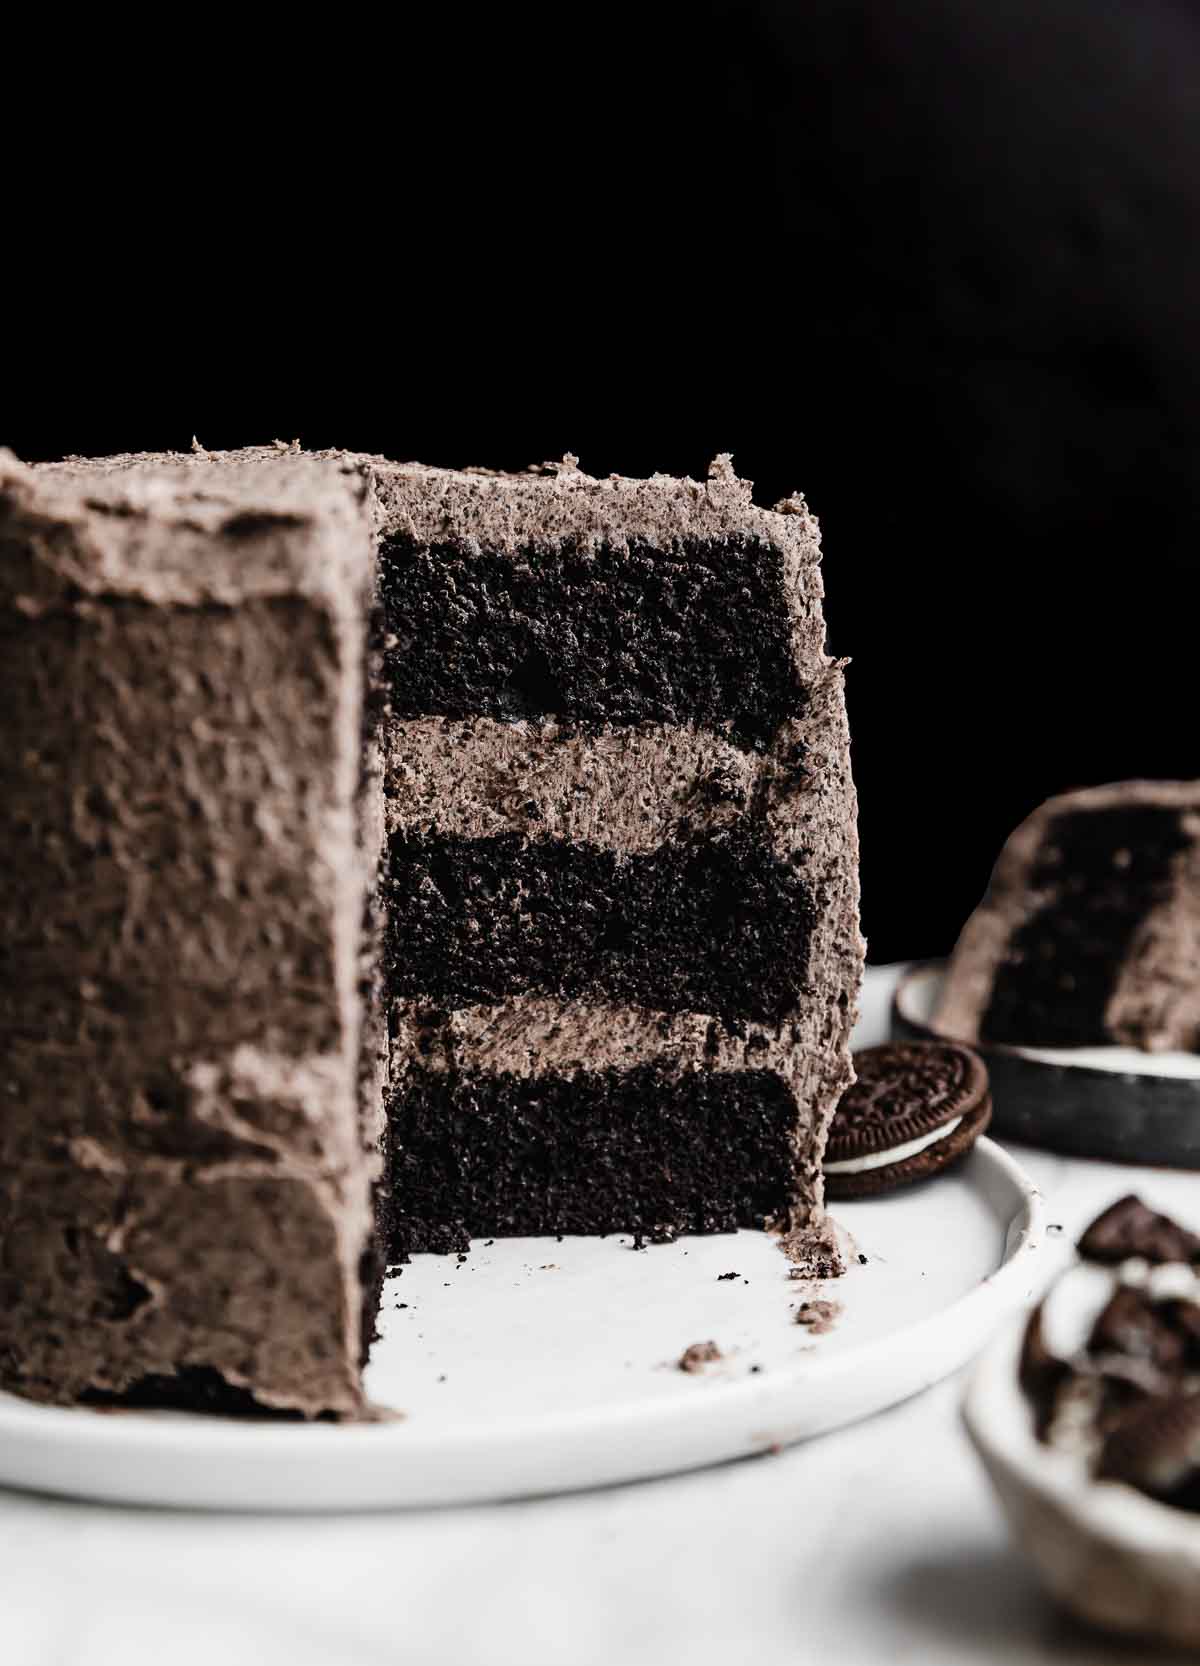 A three layer six inch Oreo Cake recipe topped with an Oreo frosting, against a black background.